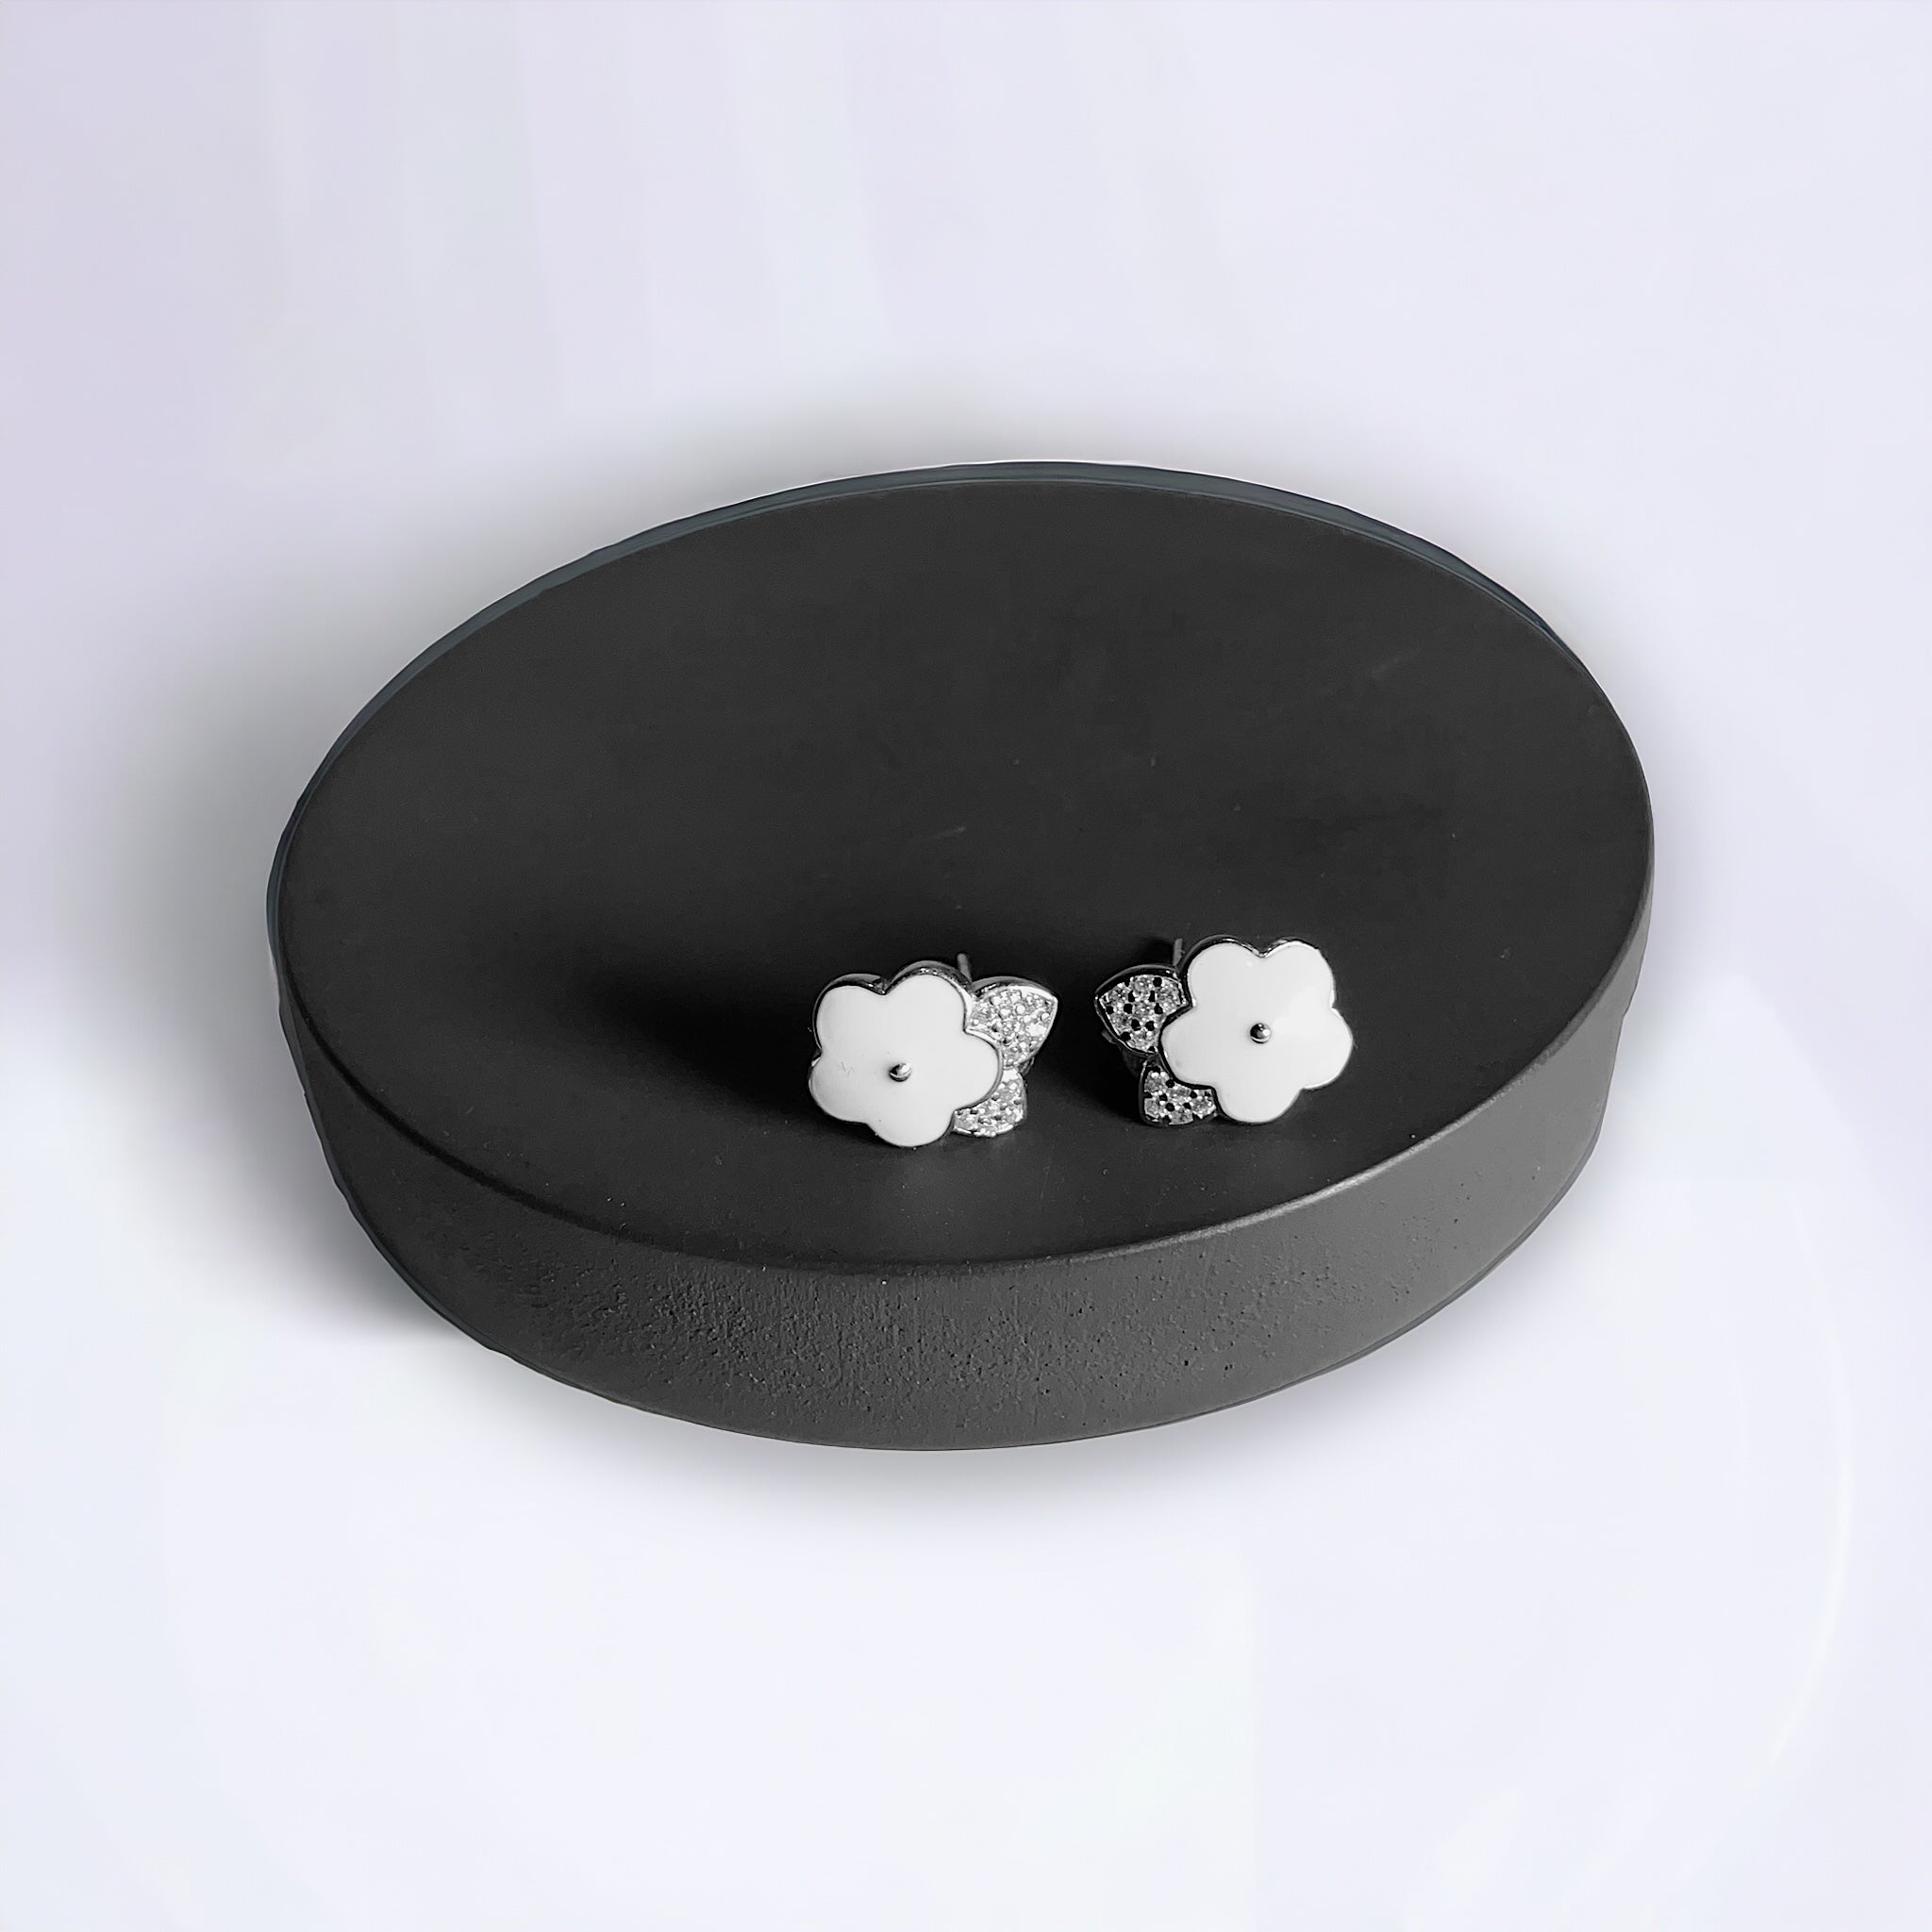 a pair of white flower earrings sitting on top of a black box